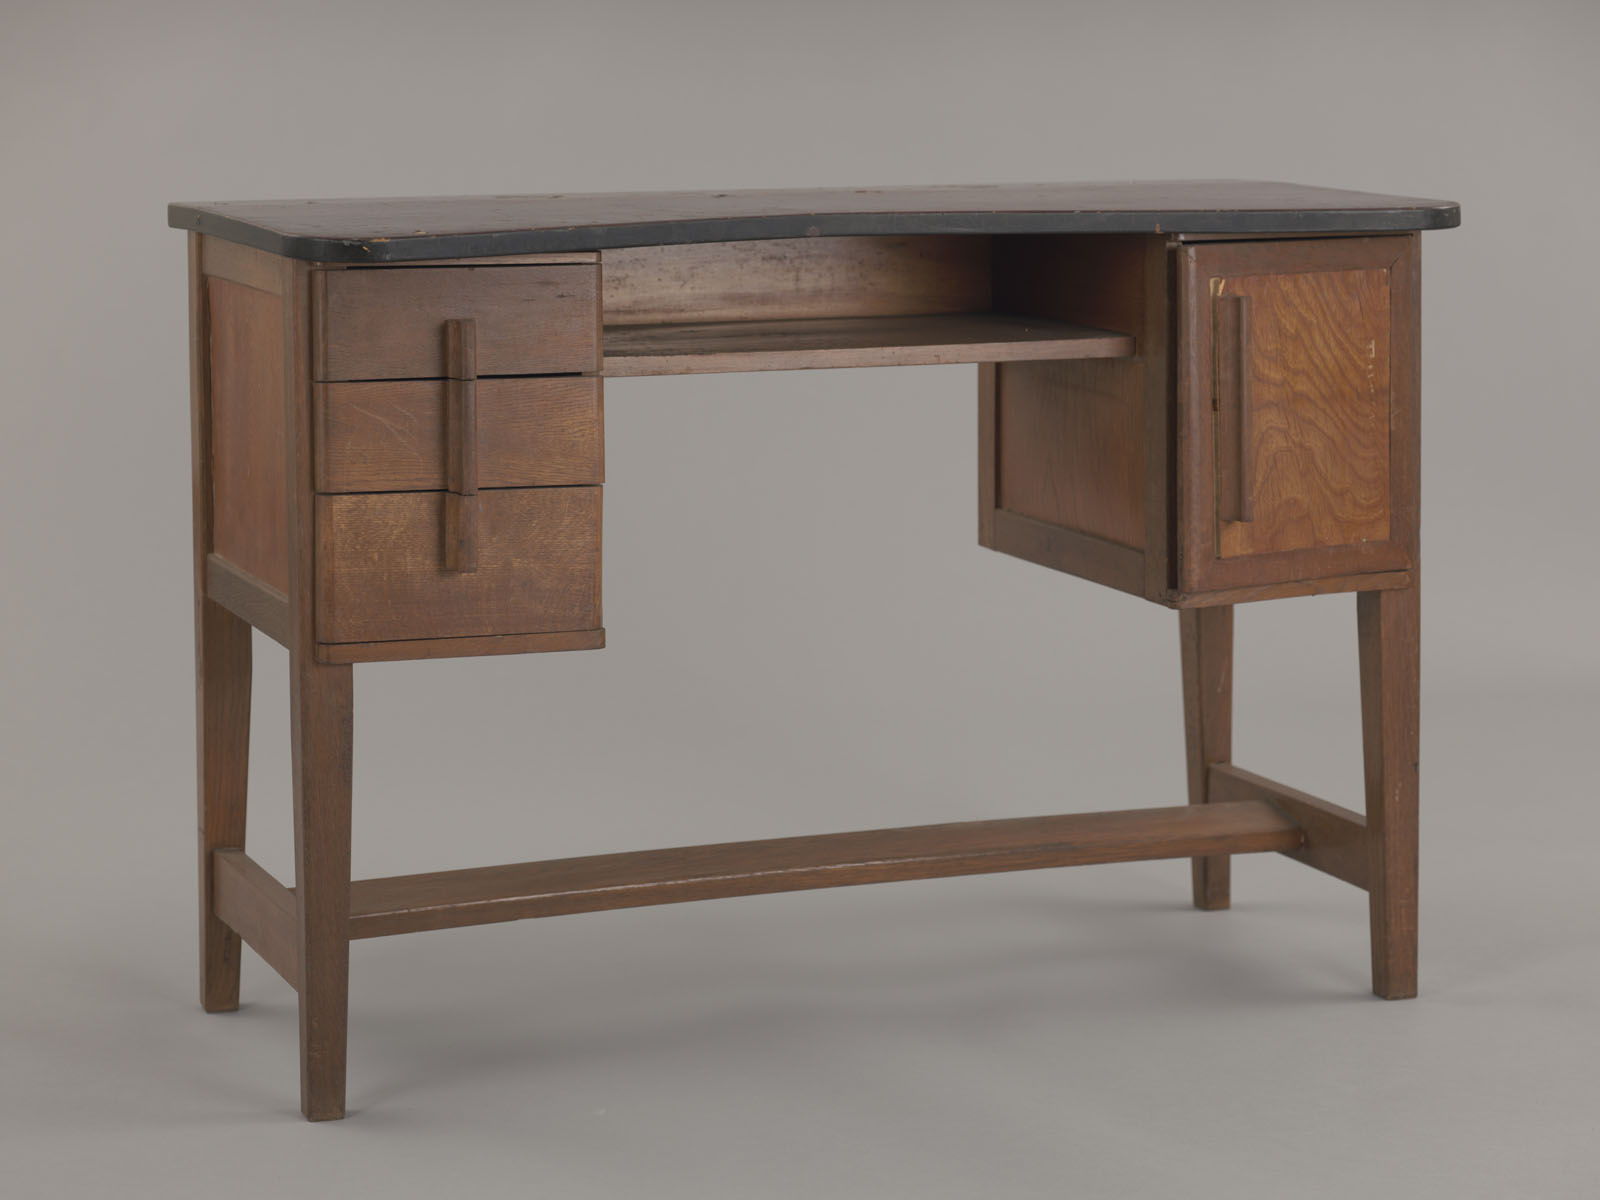 Desk regularly used by Ofuji (at an angle)